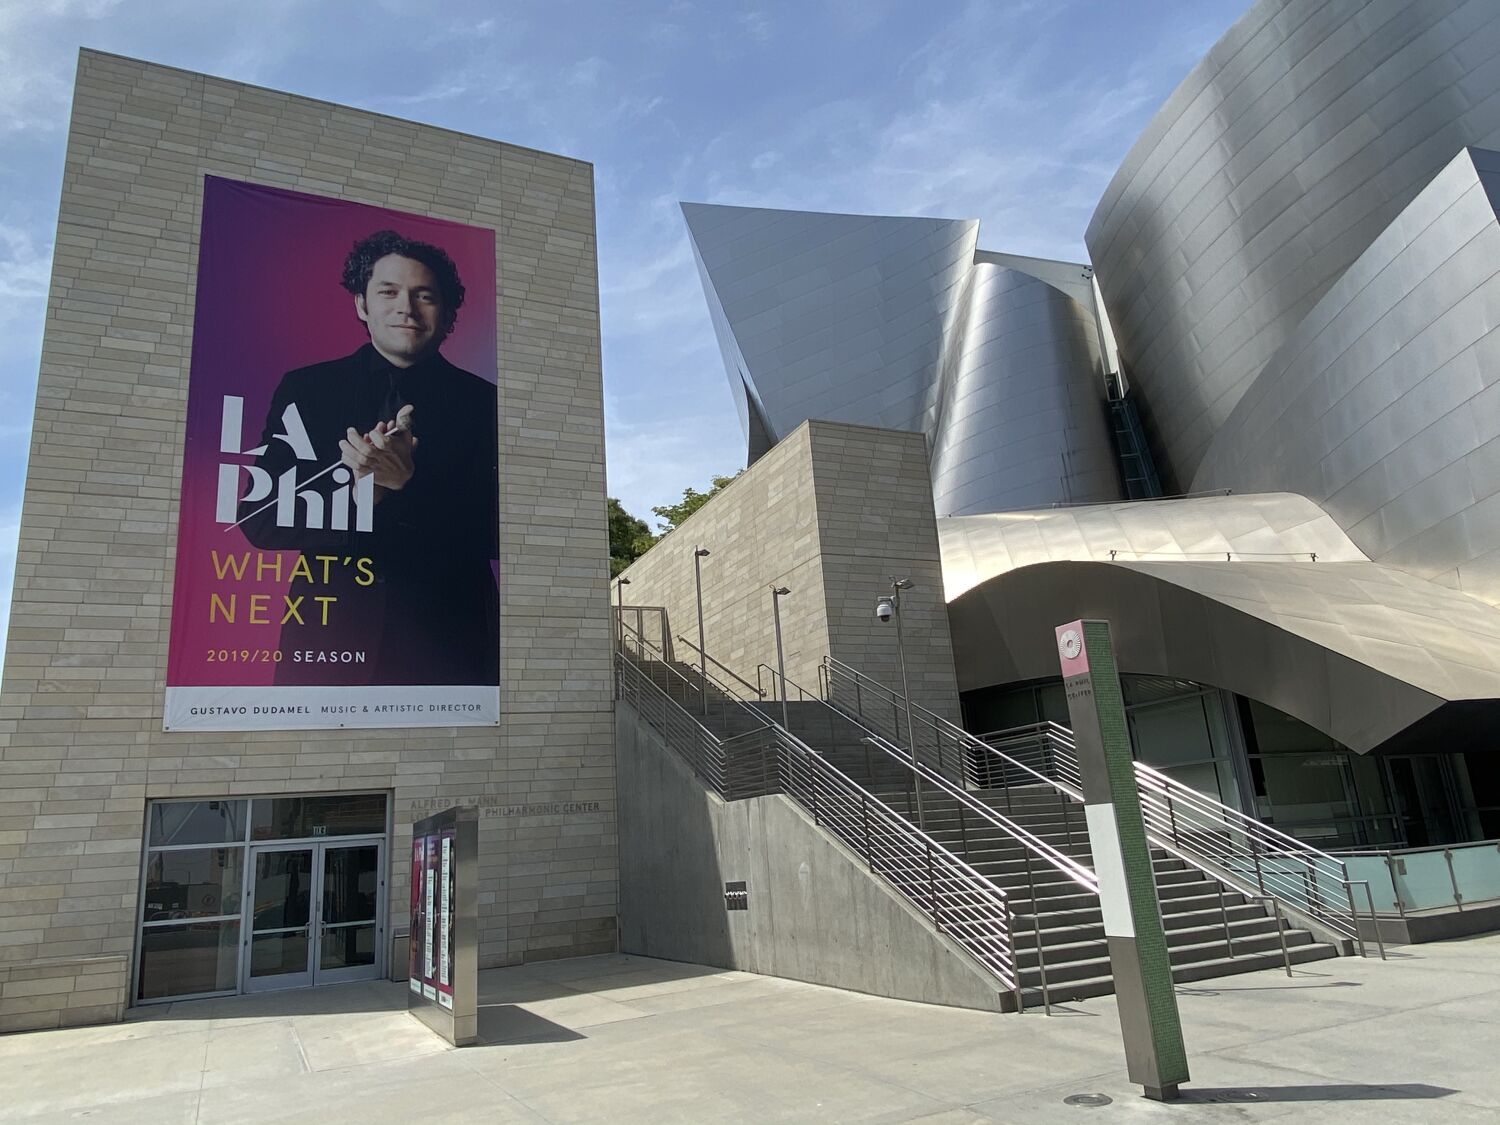 Been there, done that, bought the T-shirt: Rousing L.A. Phil concert inspires merch